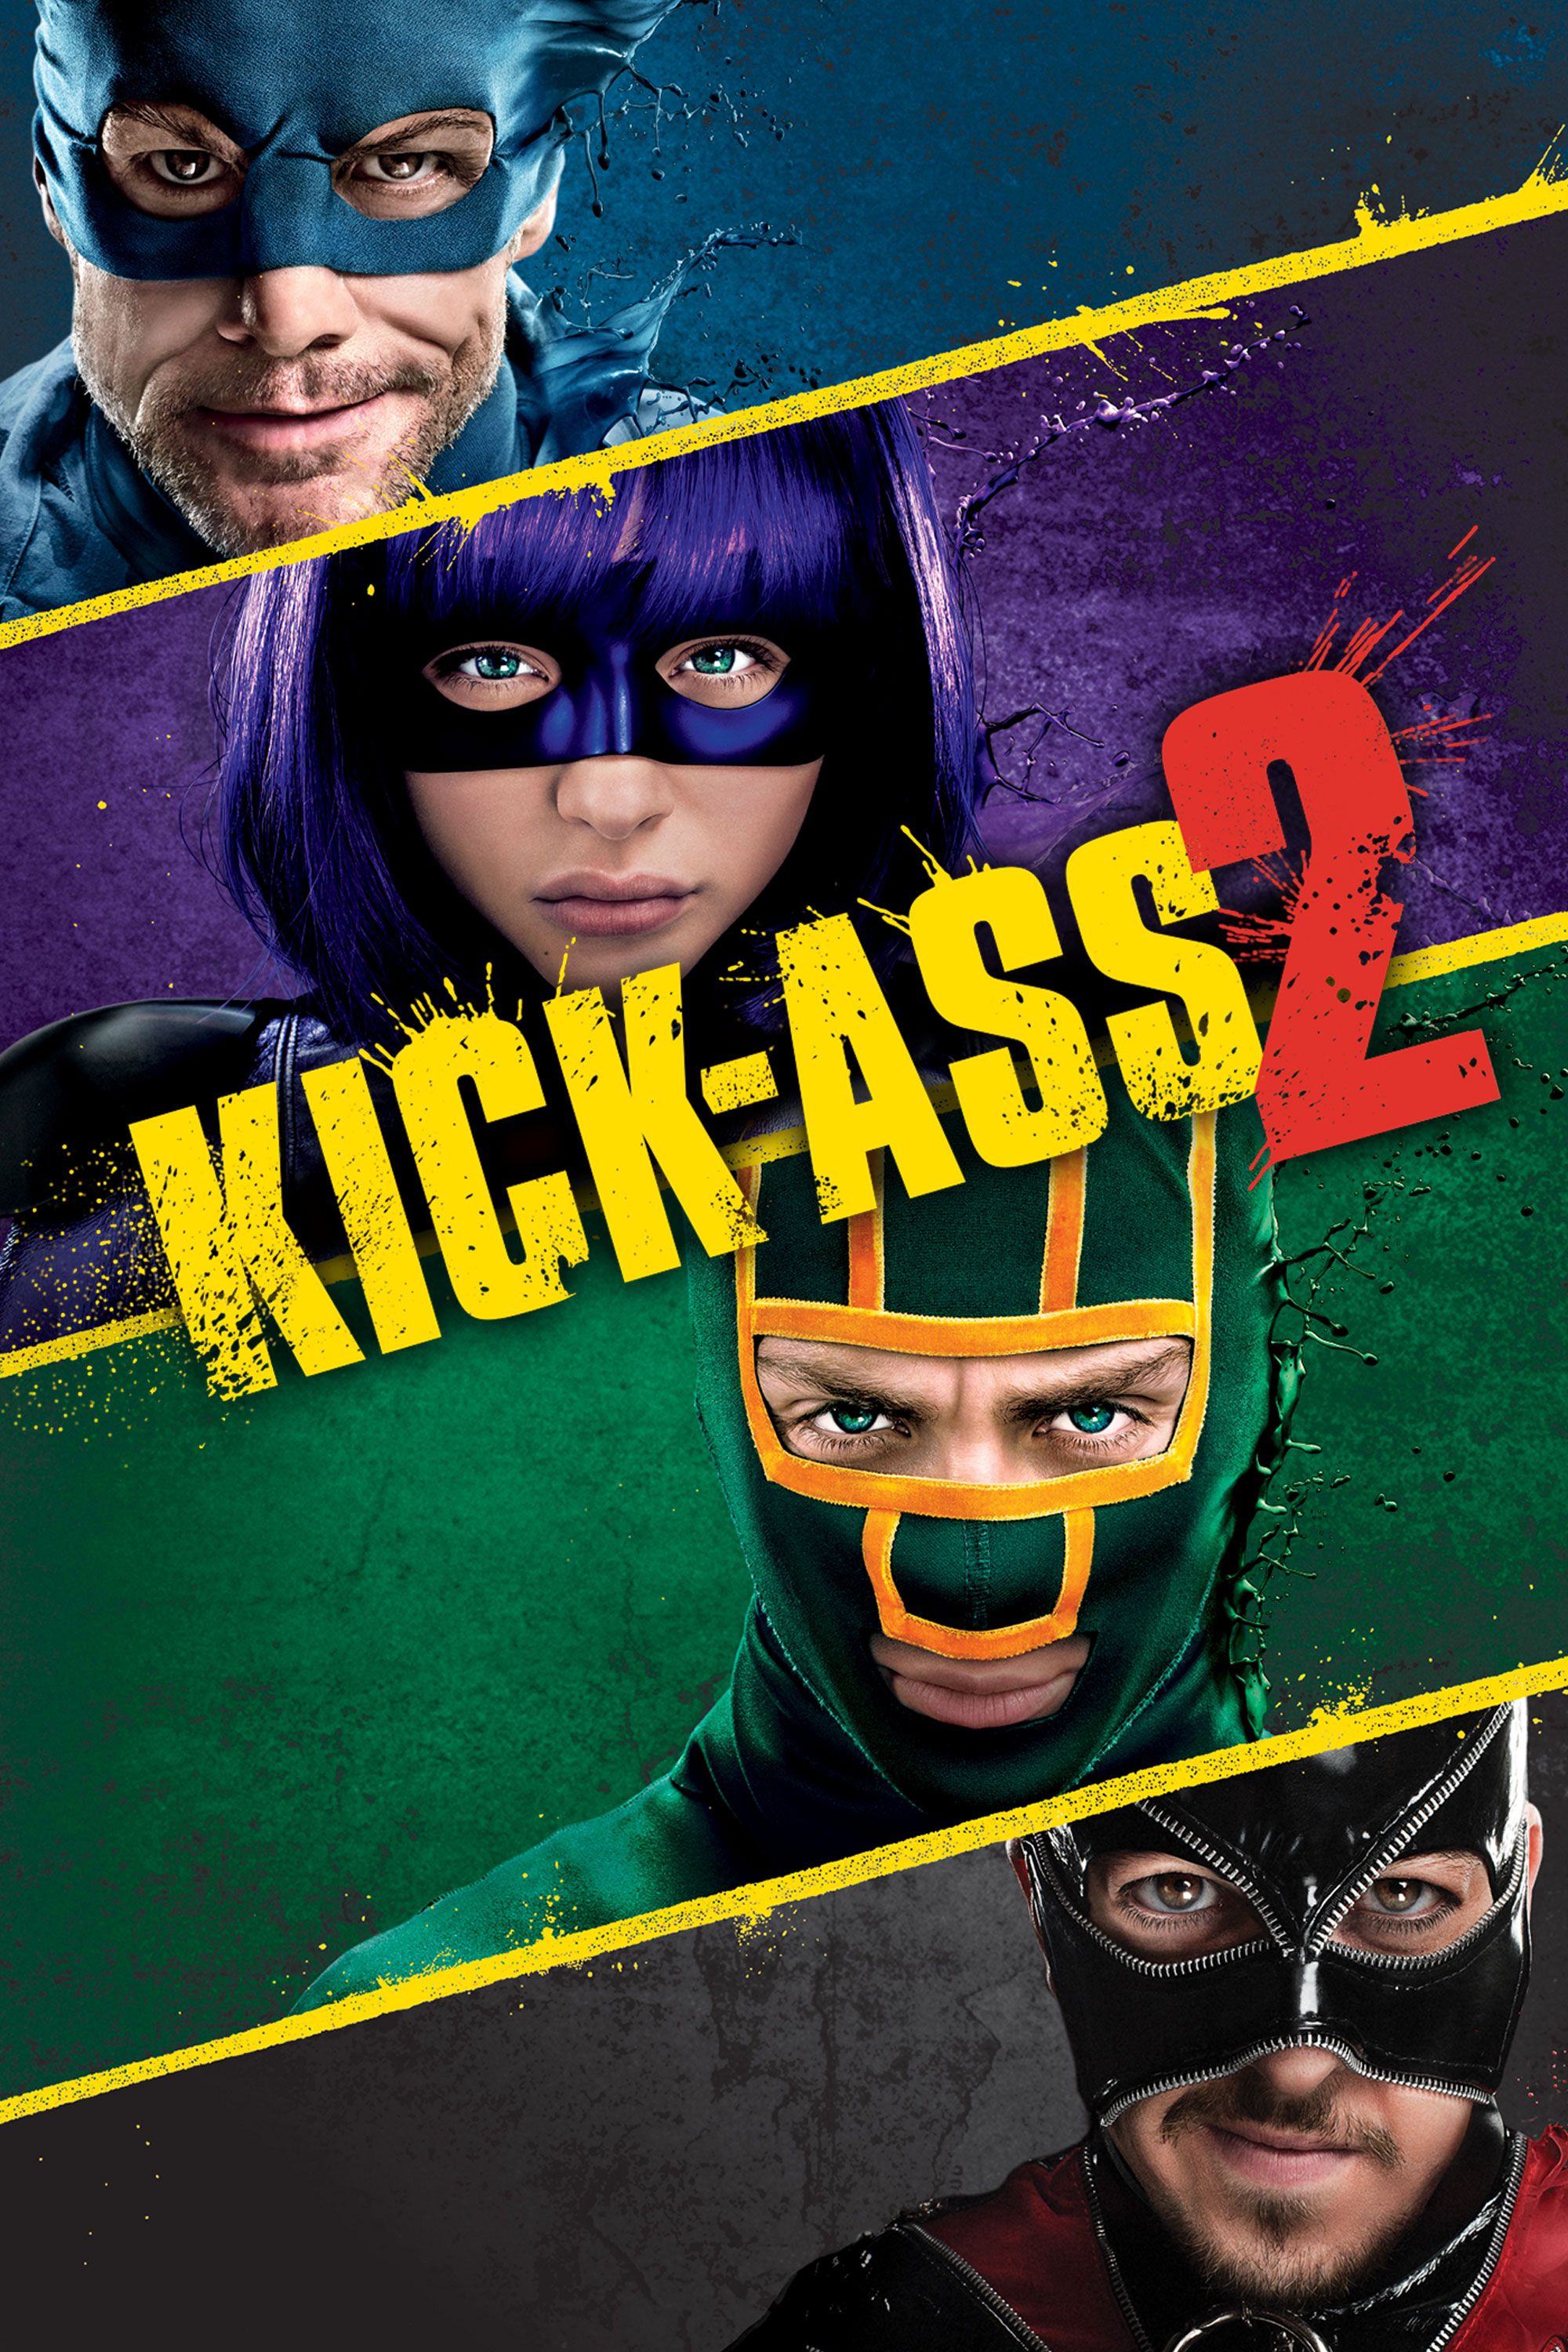 Kick Ass 2 2013 Full Movie Online In Hd Quality